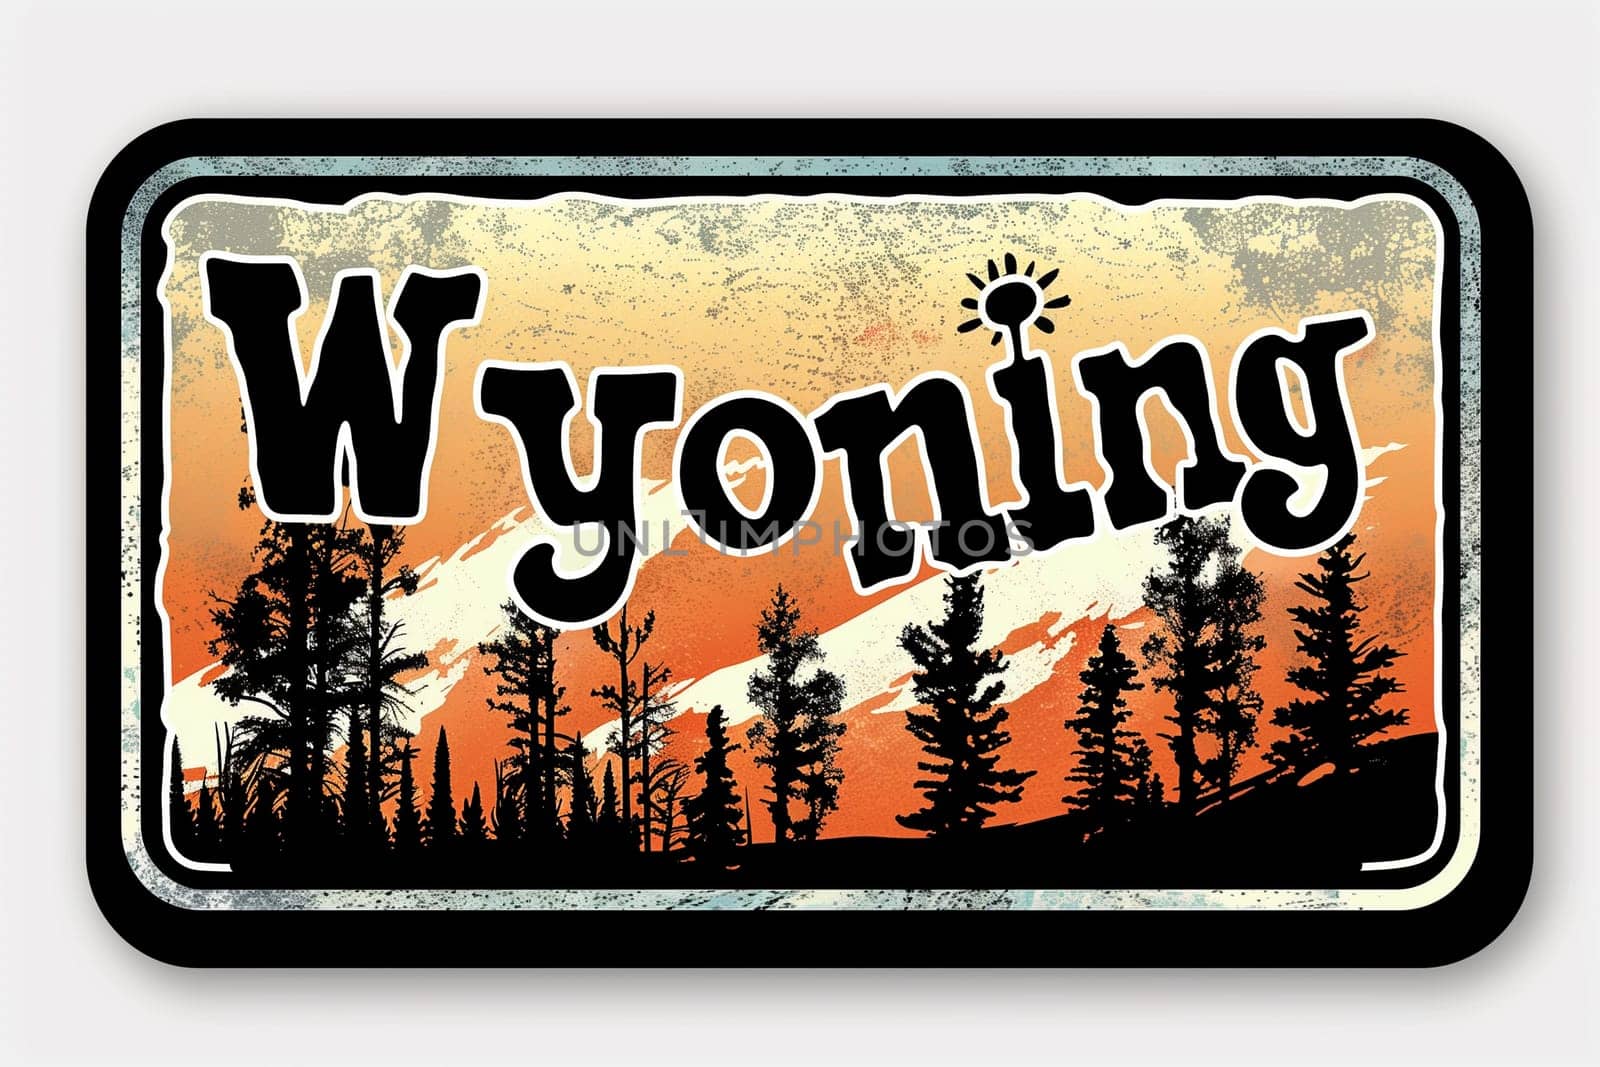 A sign with the word Wyoming stands prominently with a backdrop of lush green trees.